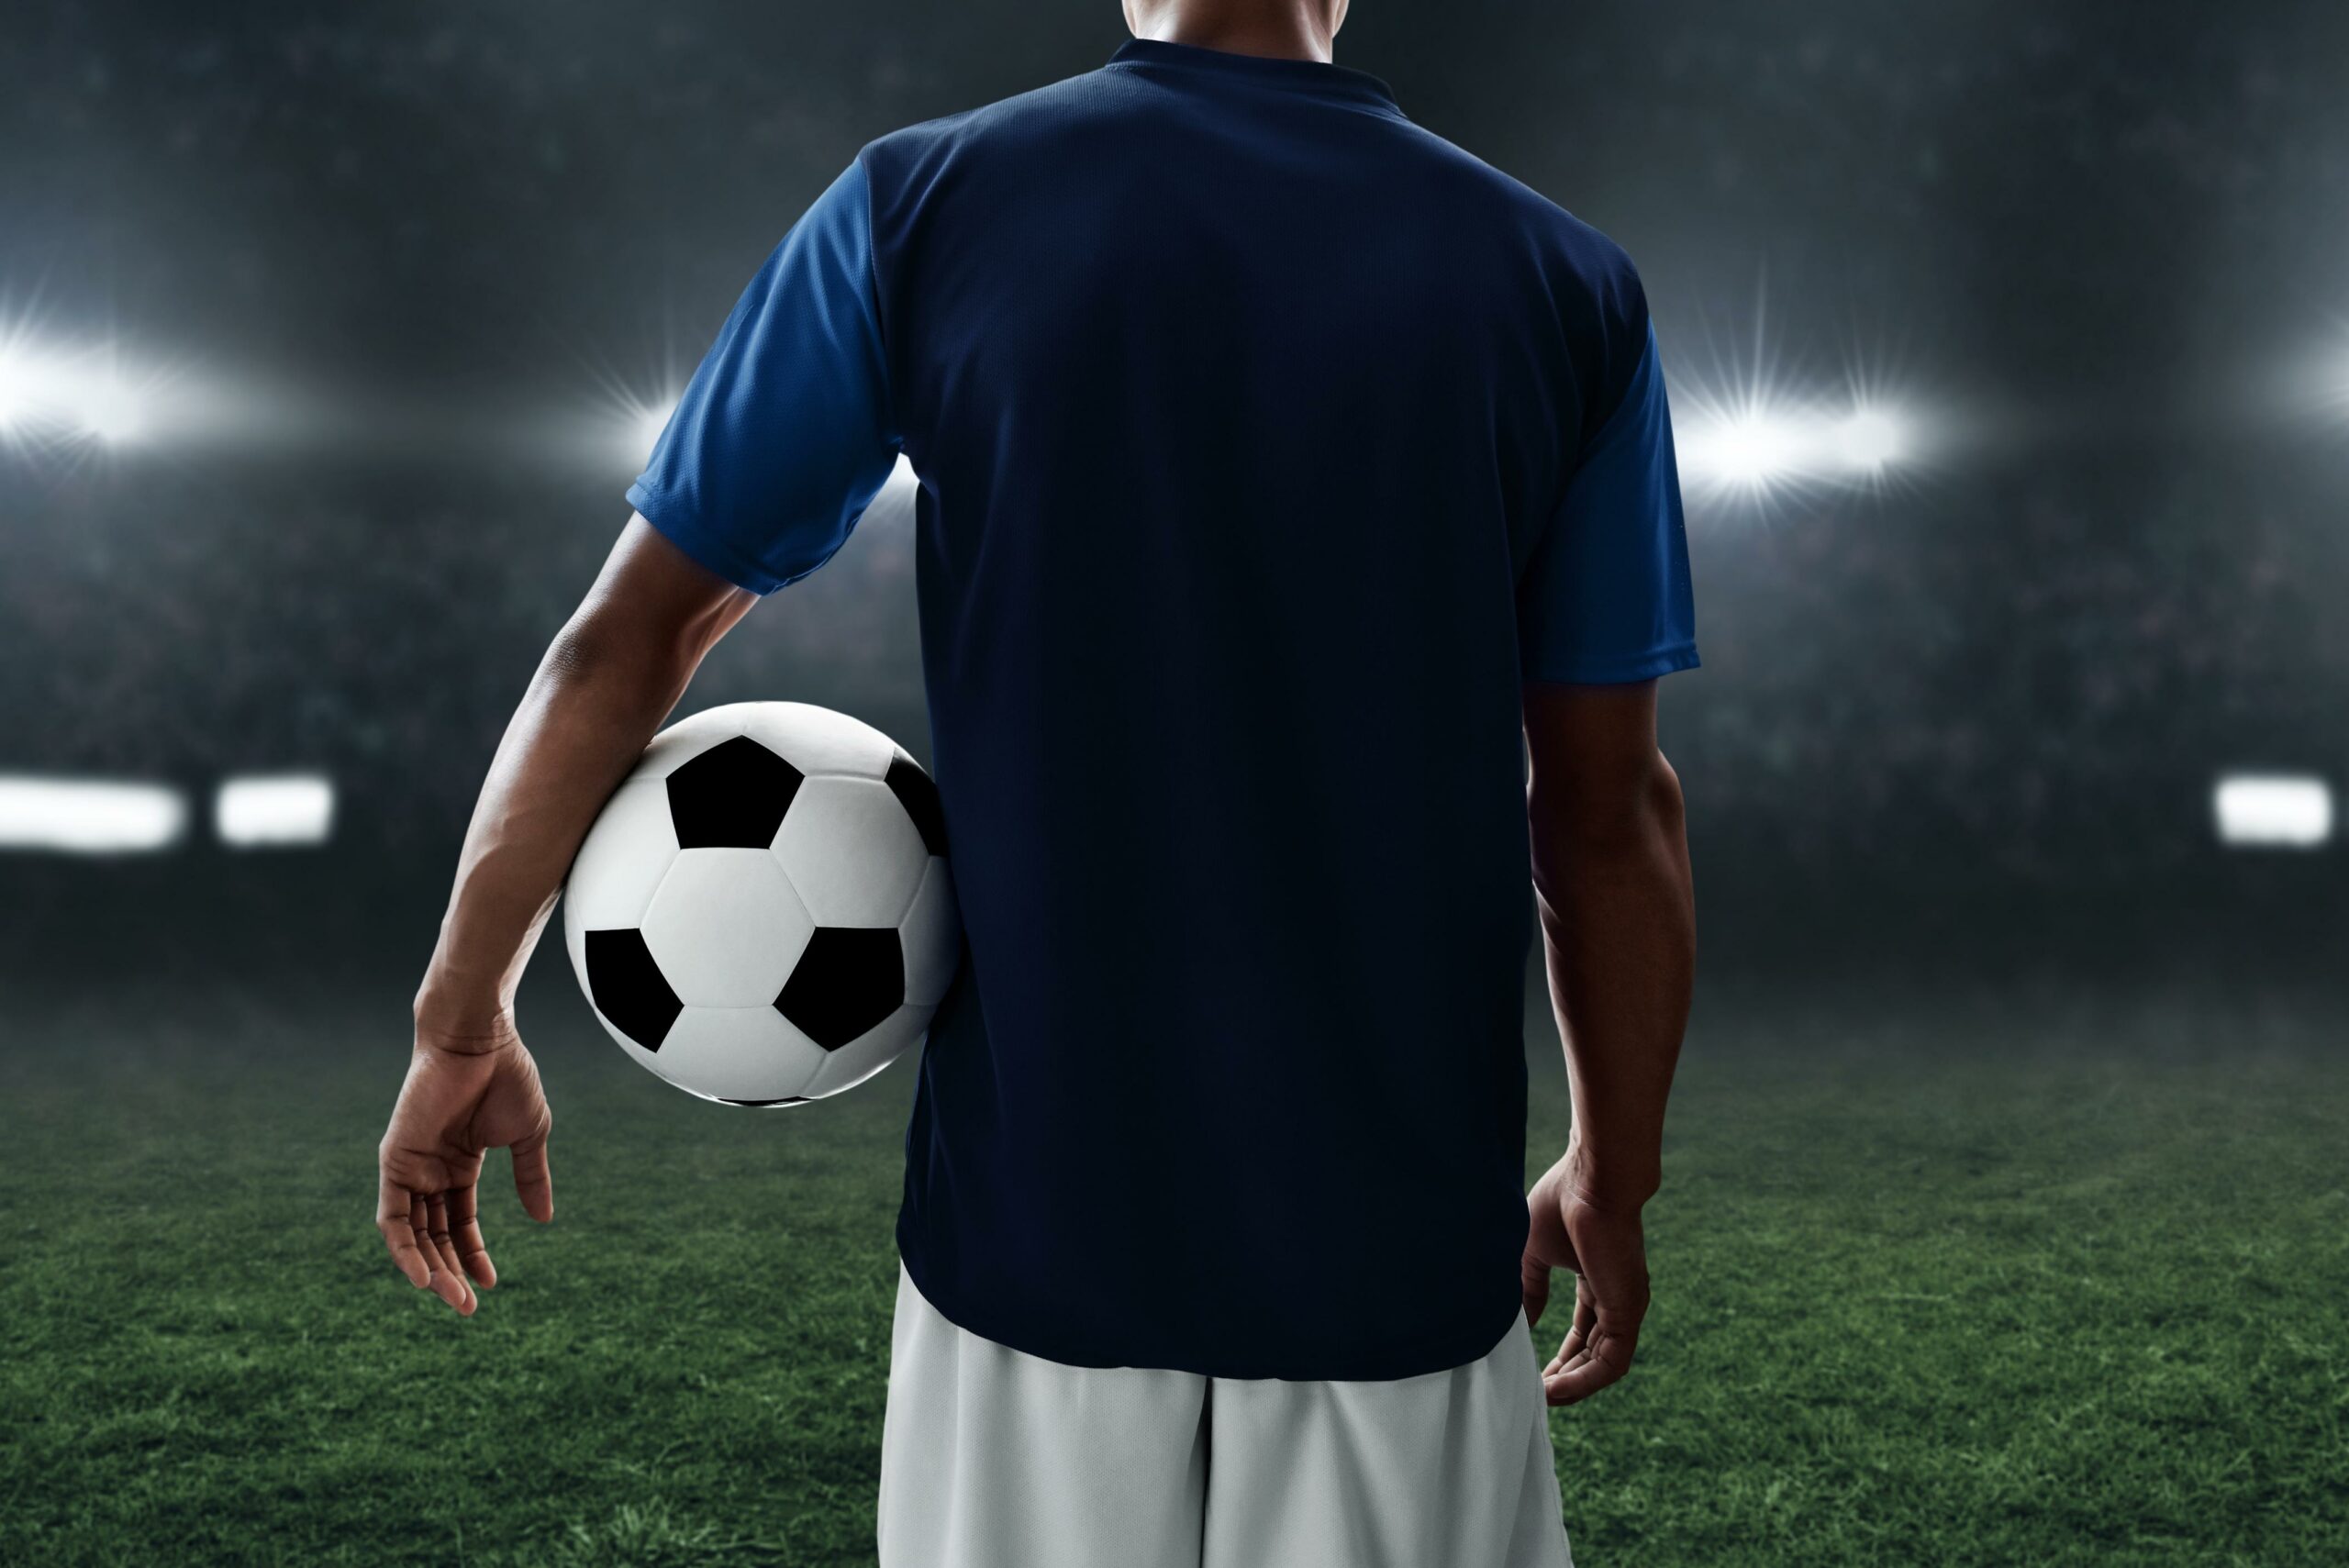 Soccer Ball Concept, Sports Background, Soccer Stadium Picture